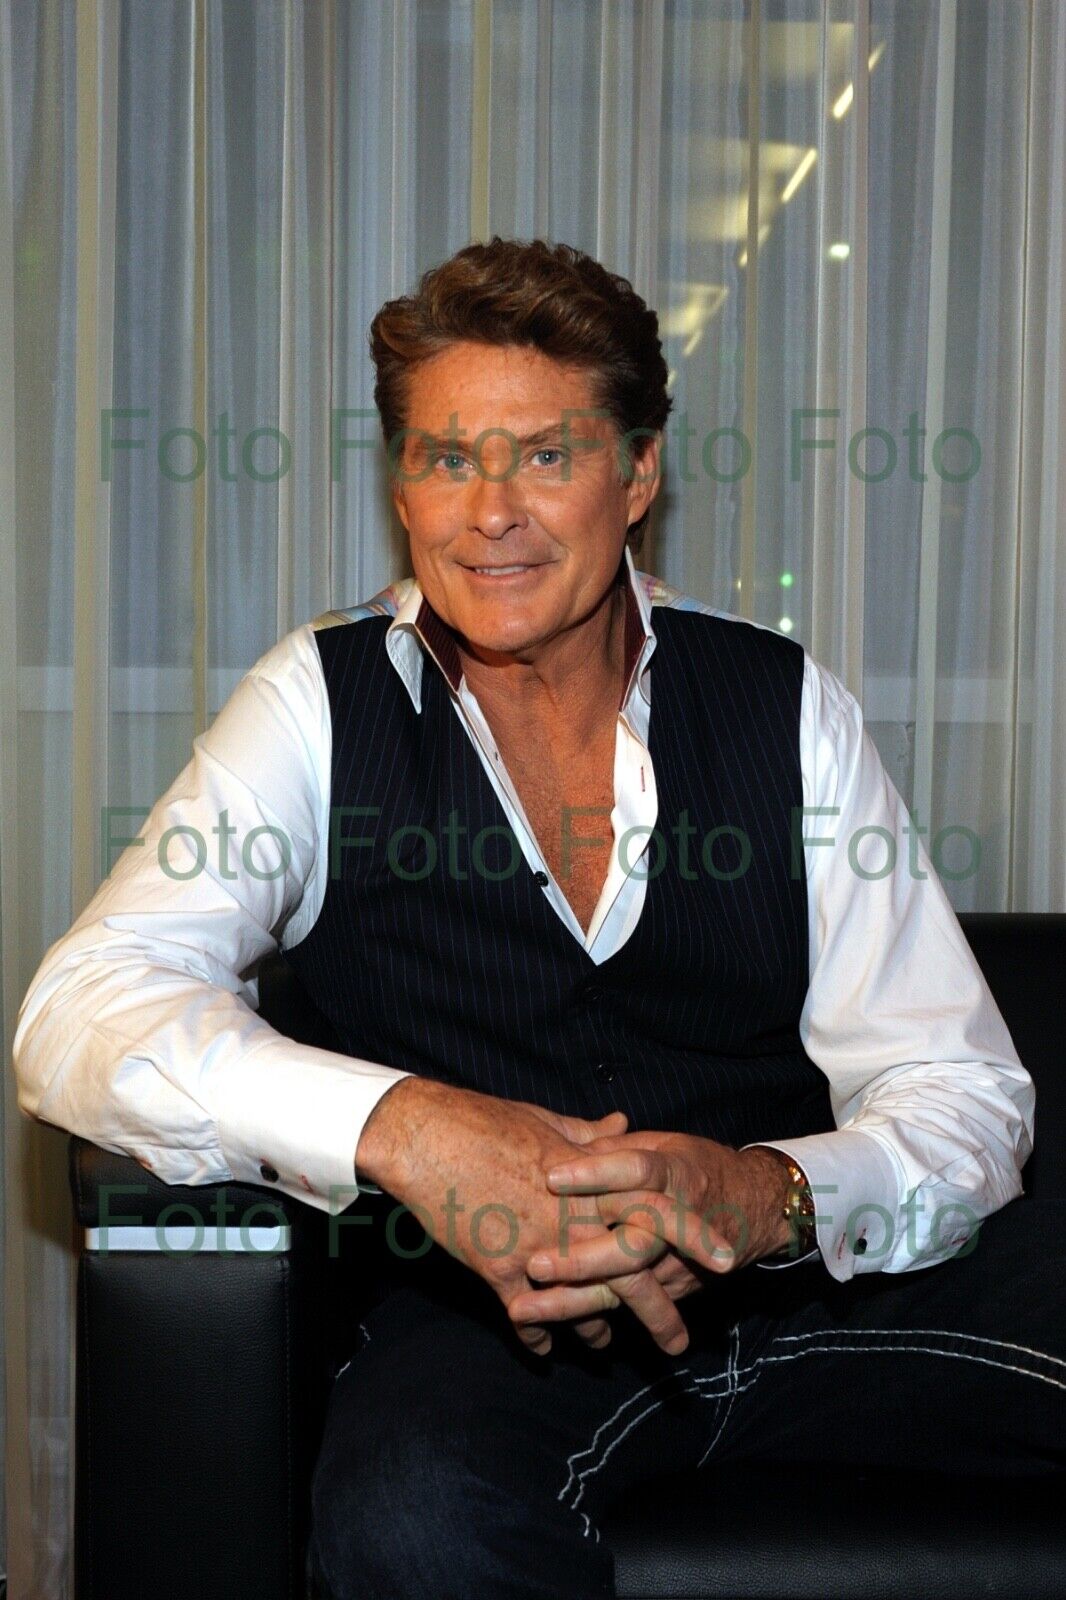 David Hasselhoff Music Film TV Photo Poster painting 20 X 30 CM Without Autograph (Be-9